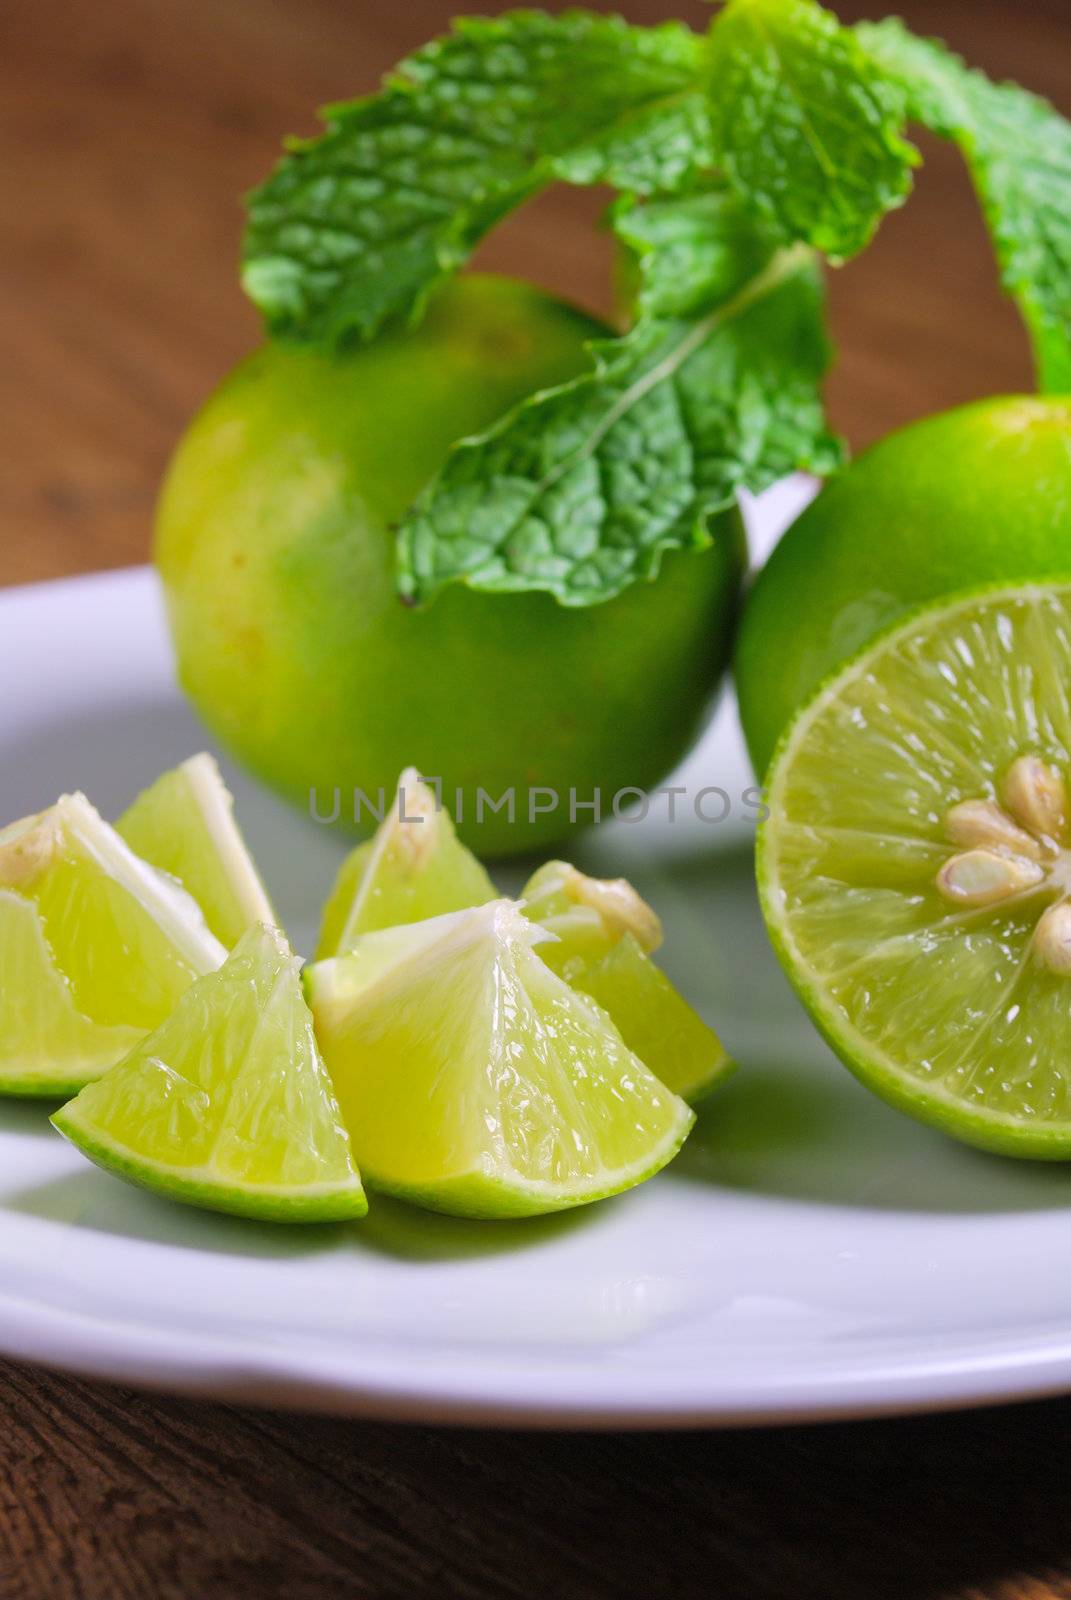 Limes and mint